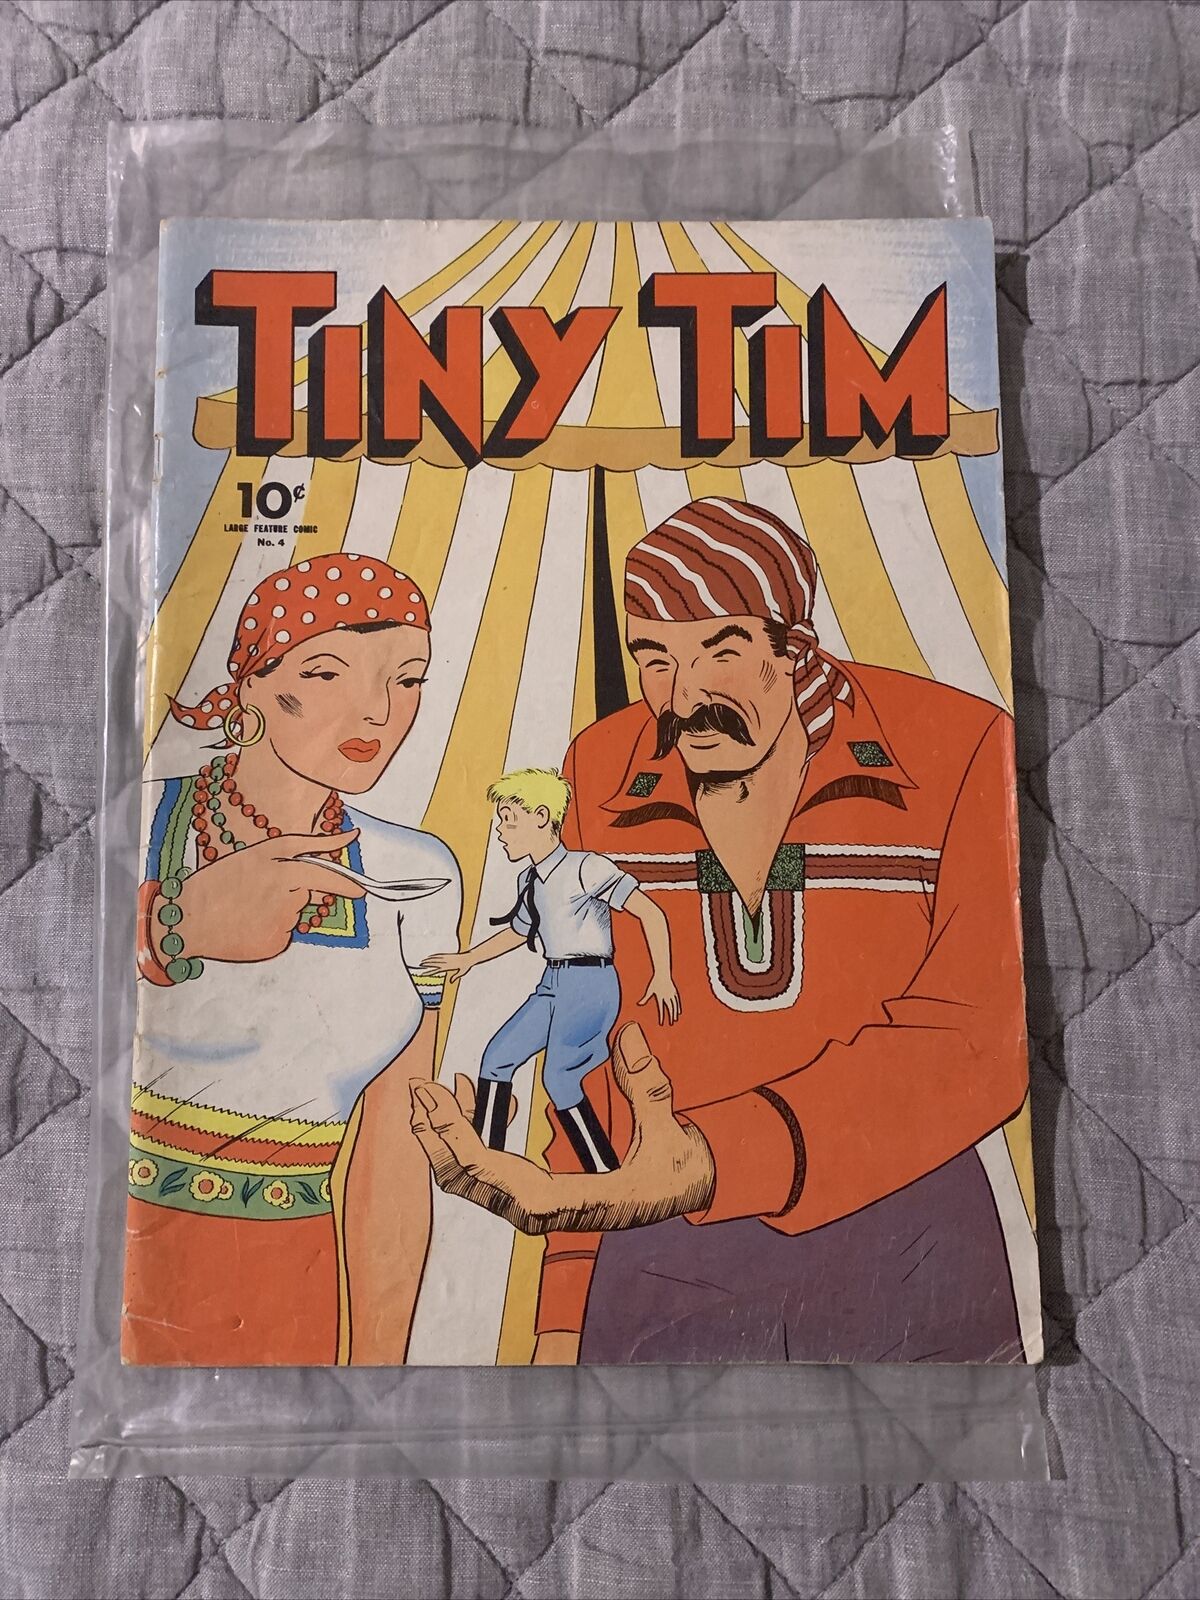 LARGE FEATURE COMIC # 4 - TINY TIM -  FROM 1941 